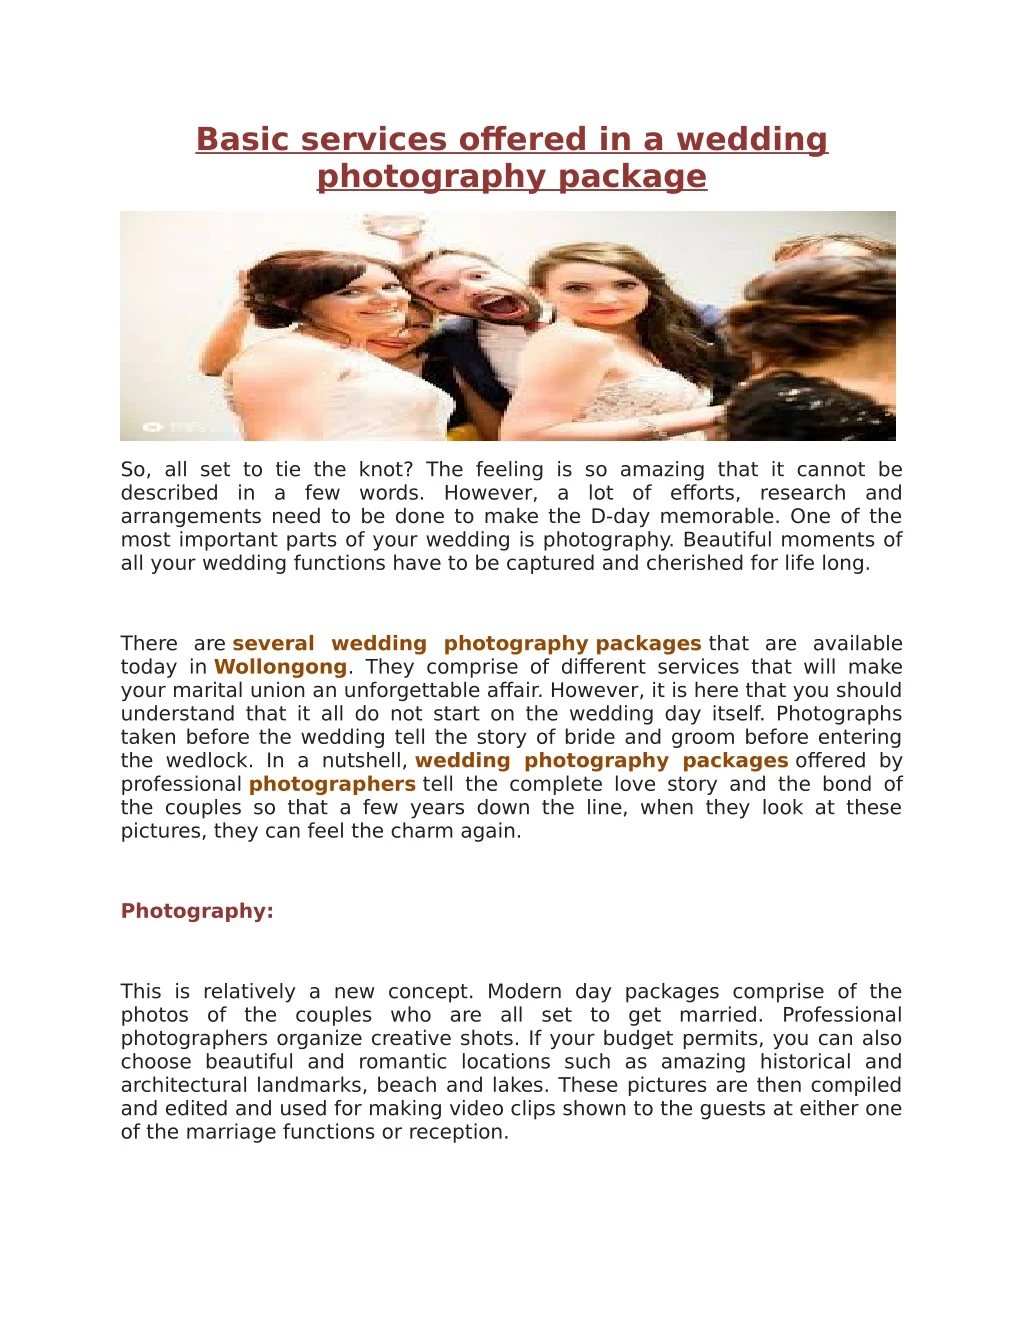 basic services offered in a wedding photography